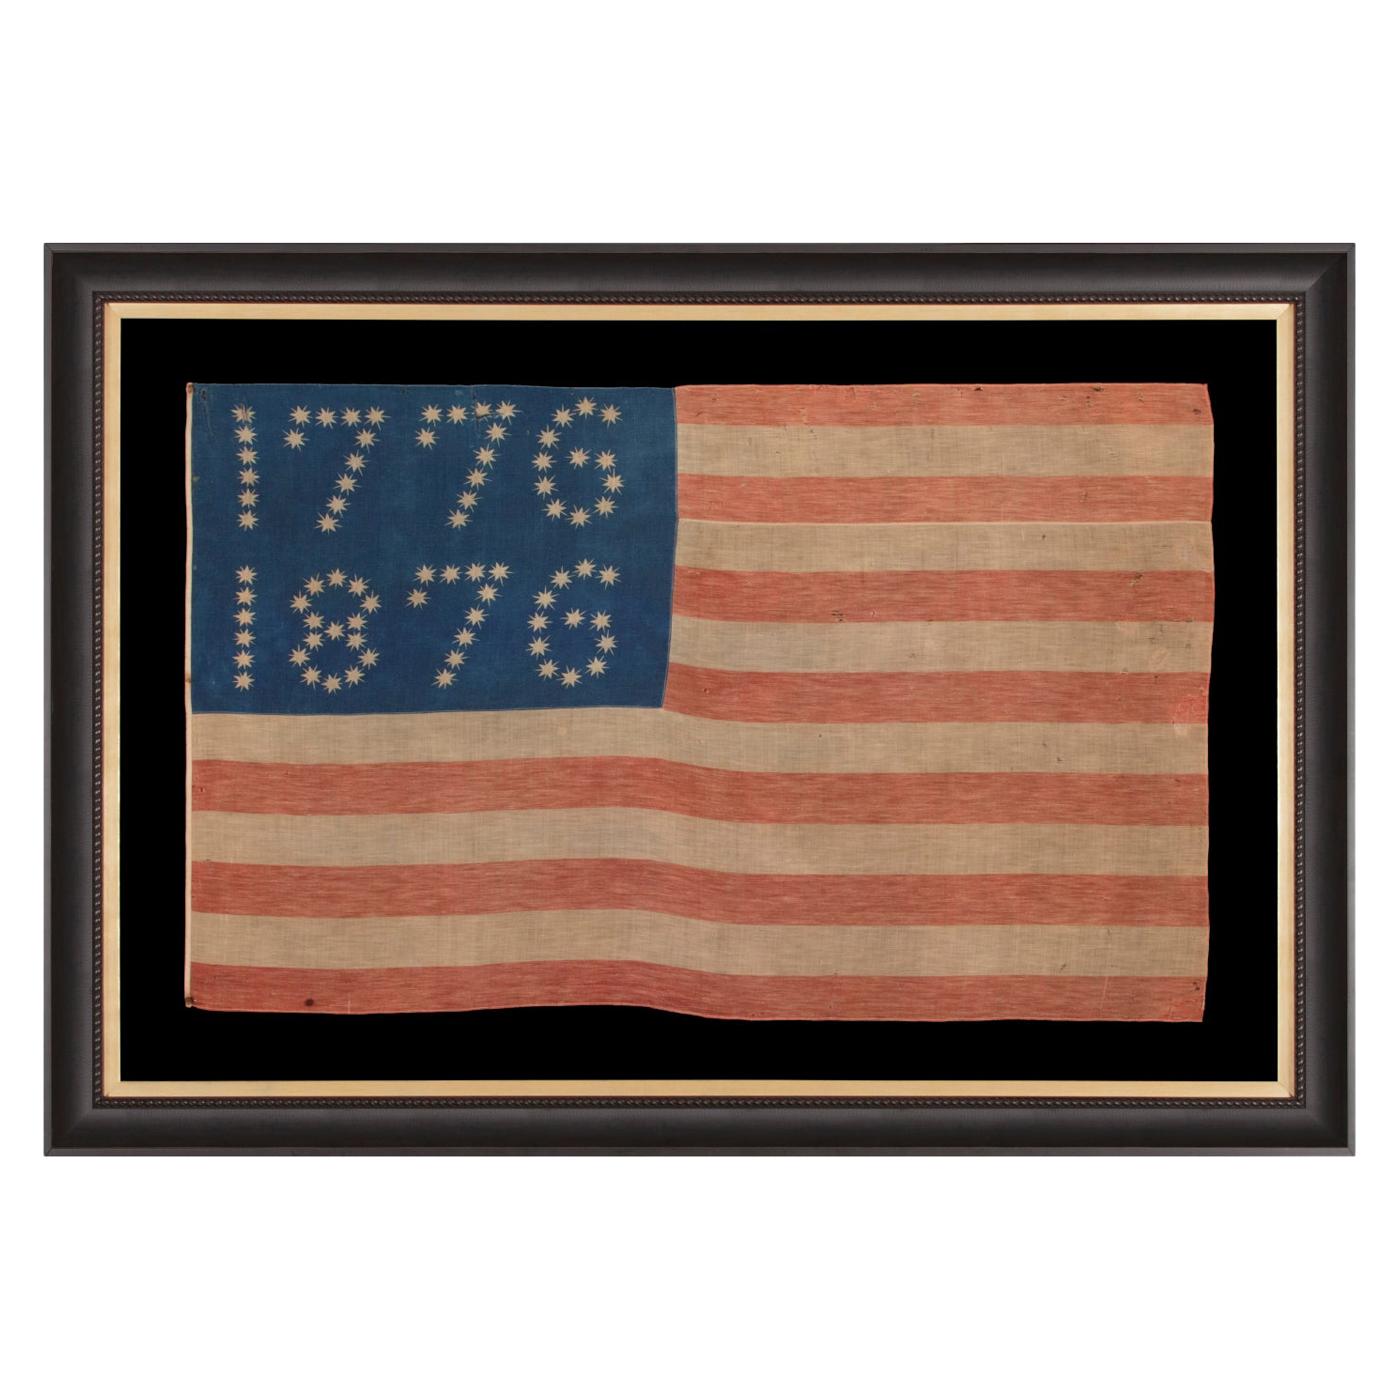 38 Star American Flag with Stars That Spell "1776-1876"